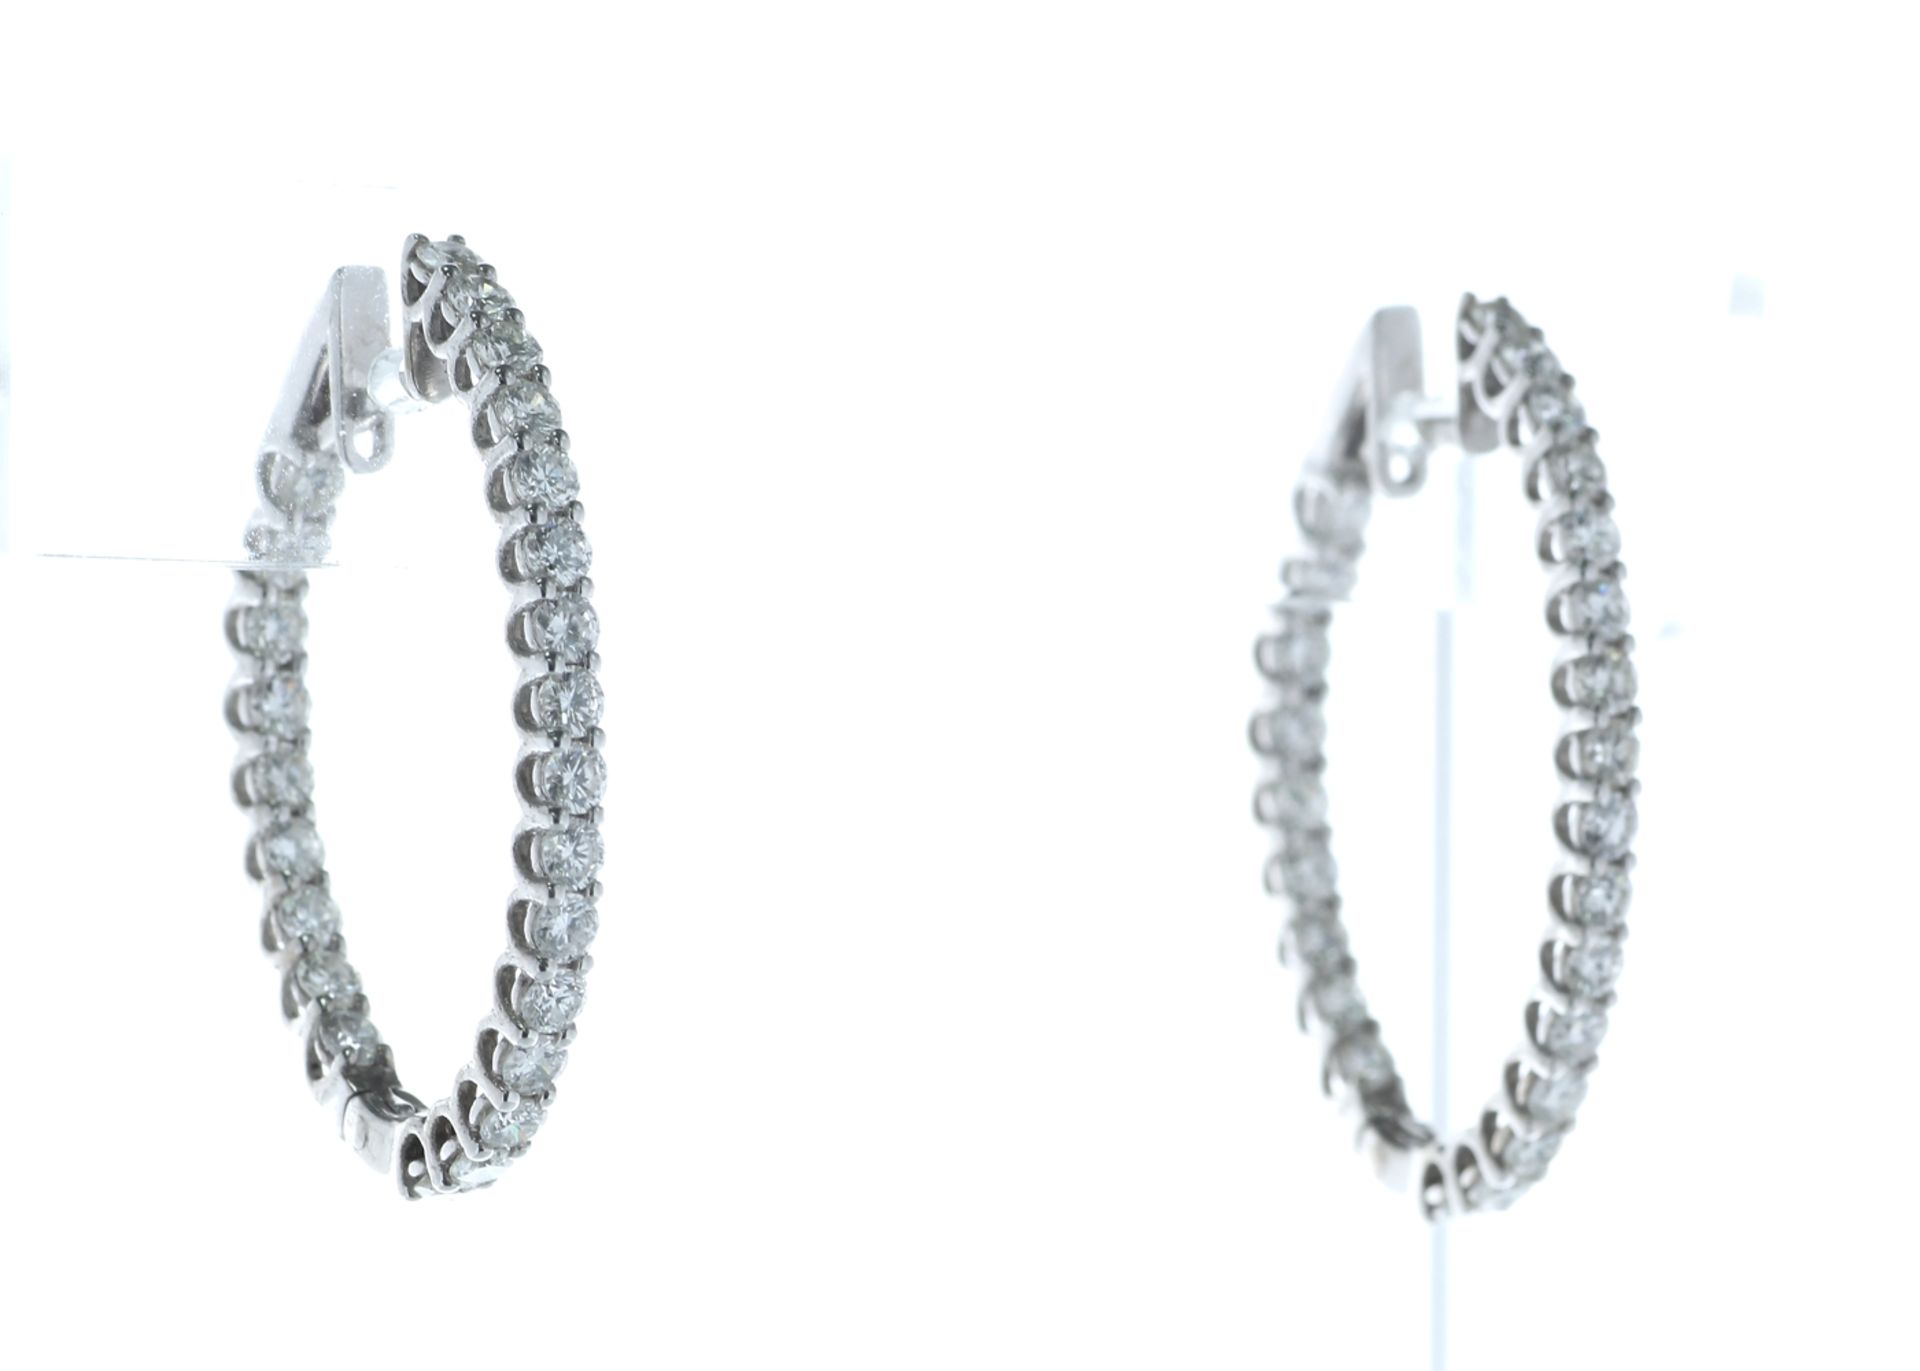 18ct White Gold Diamond Hoop Earrings 2.23 Carats - Valued by IDI £10,500.00 - 18ct White Gold - Image 2 of 4